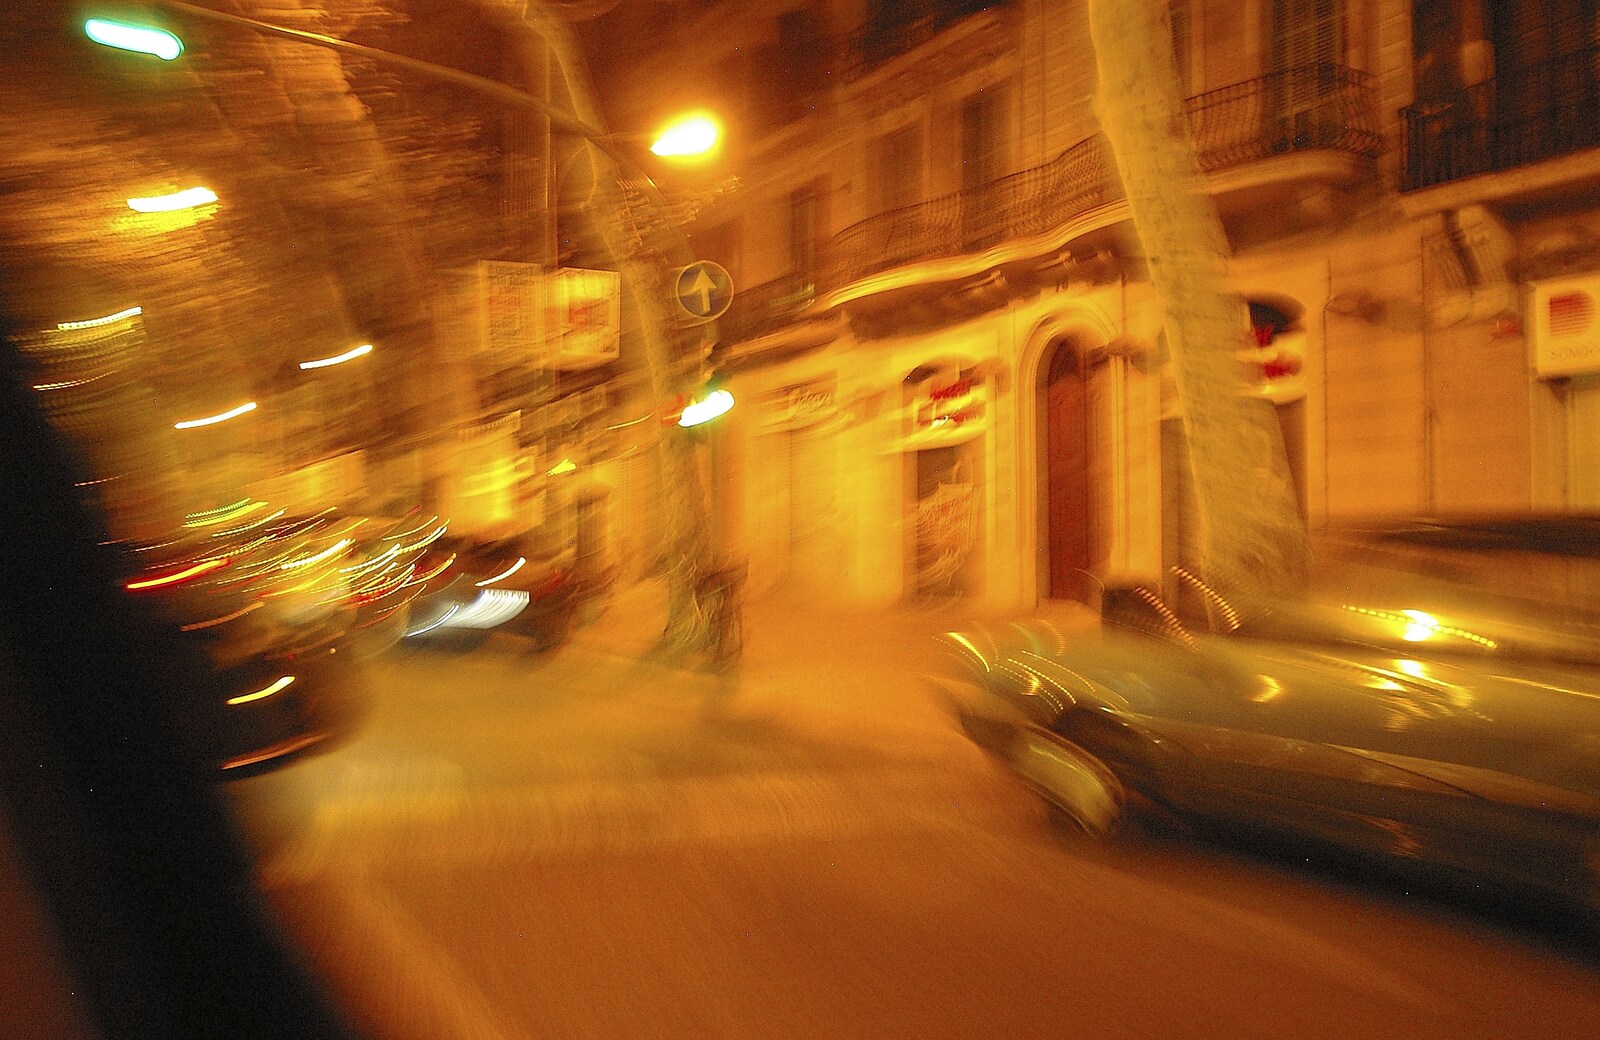 More long exposure fun from the window of a taxi from Two Days in Barcelona, Catalunya, Spain - 22nd September 2006